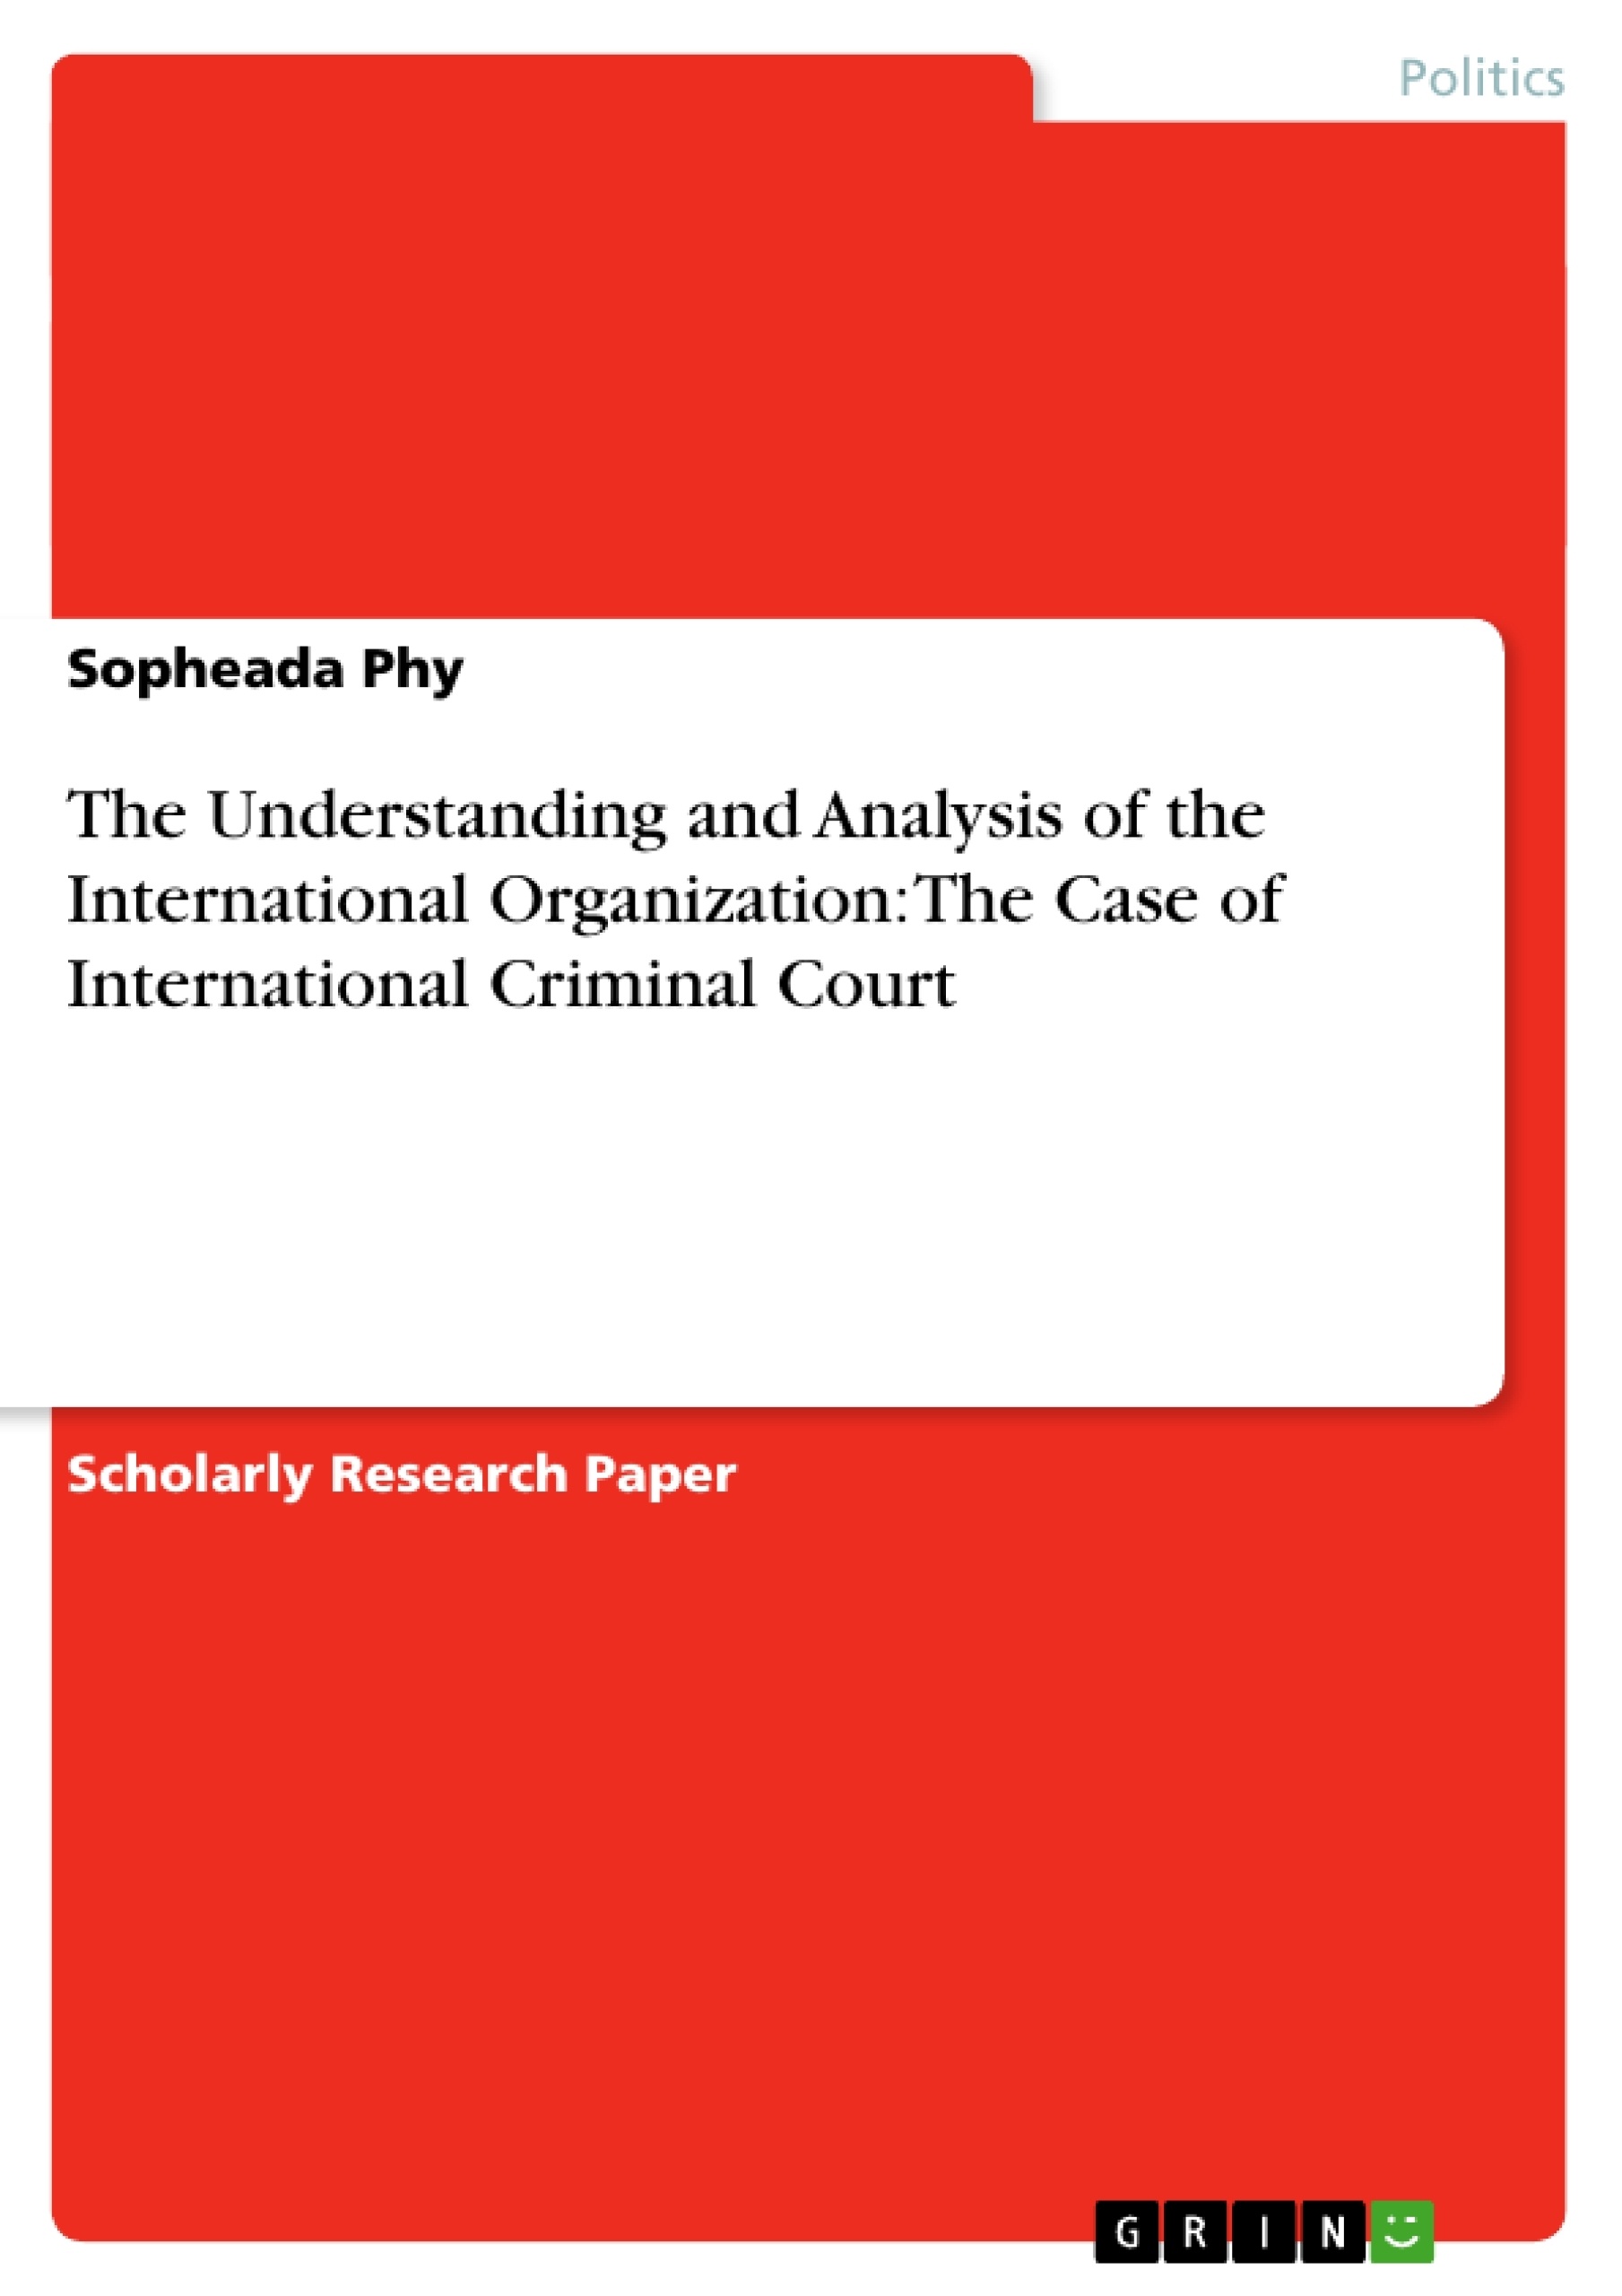 Title: The Understanding and Analysis of the International Organization: The Case of International Criminal Court